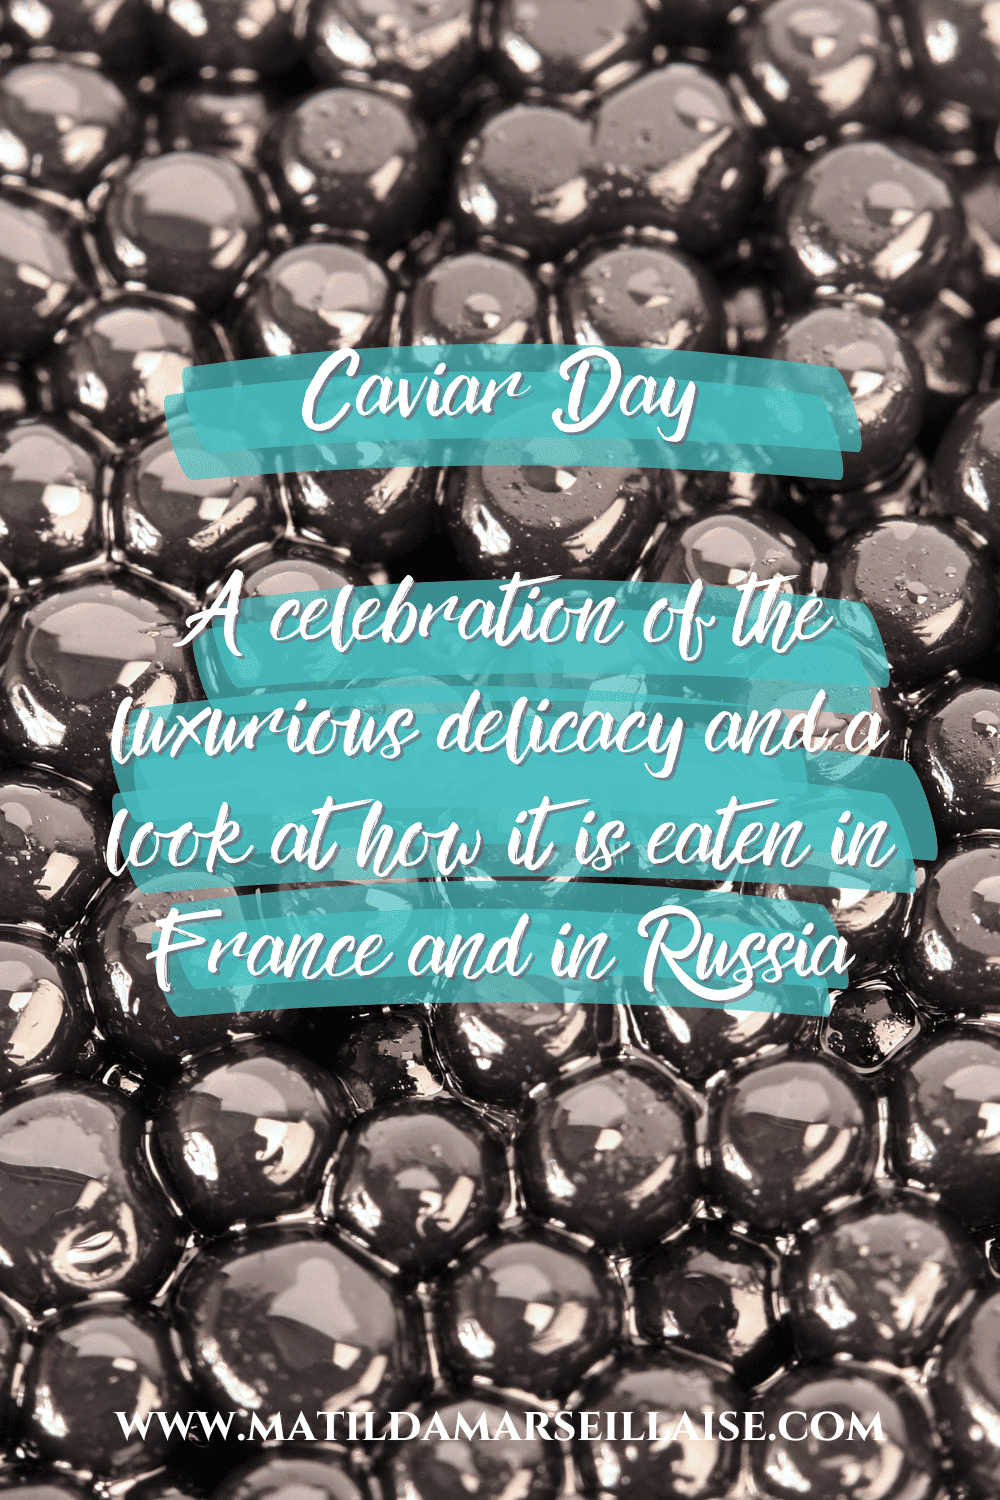 Caviar Day: A celebration of the luxurious delicacy including a wine pairing